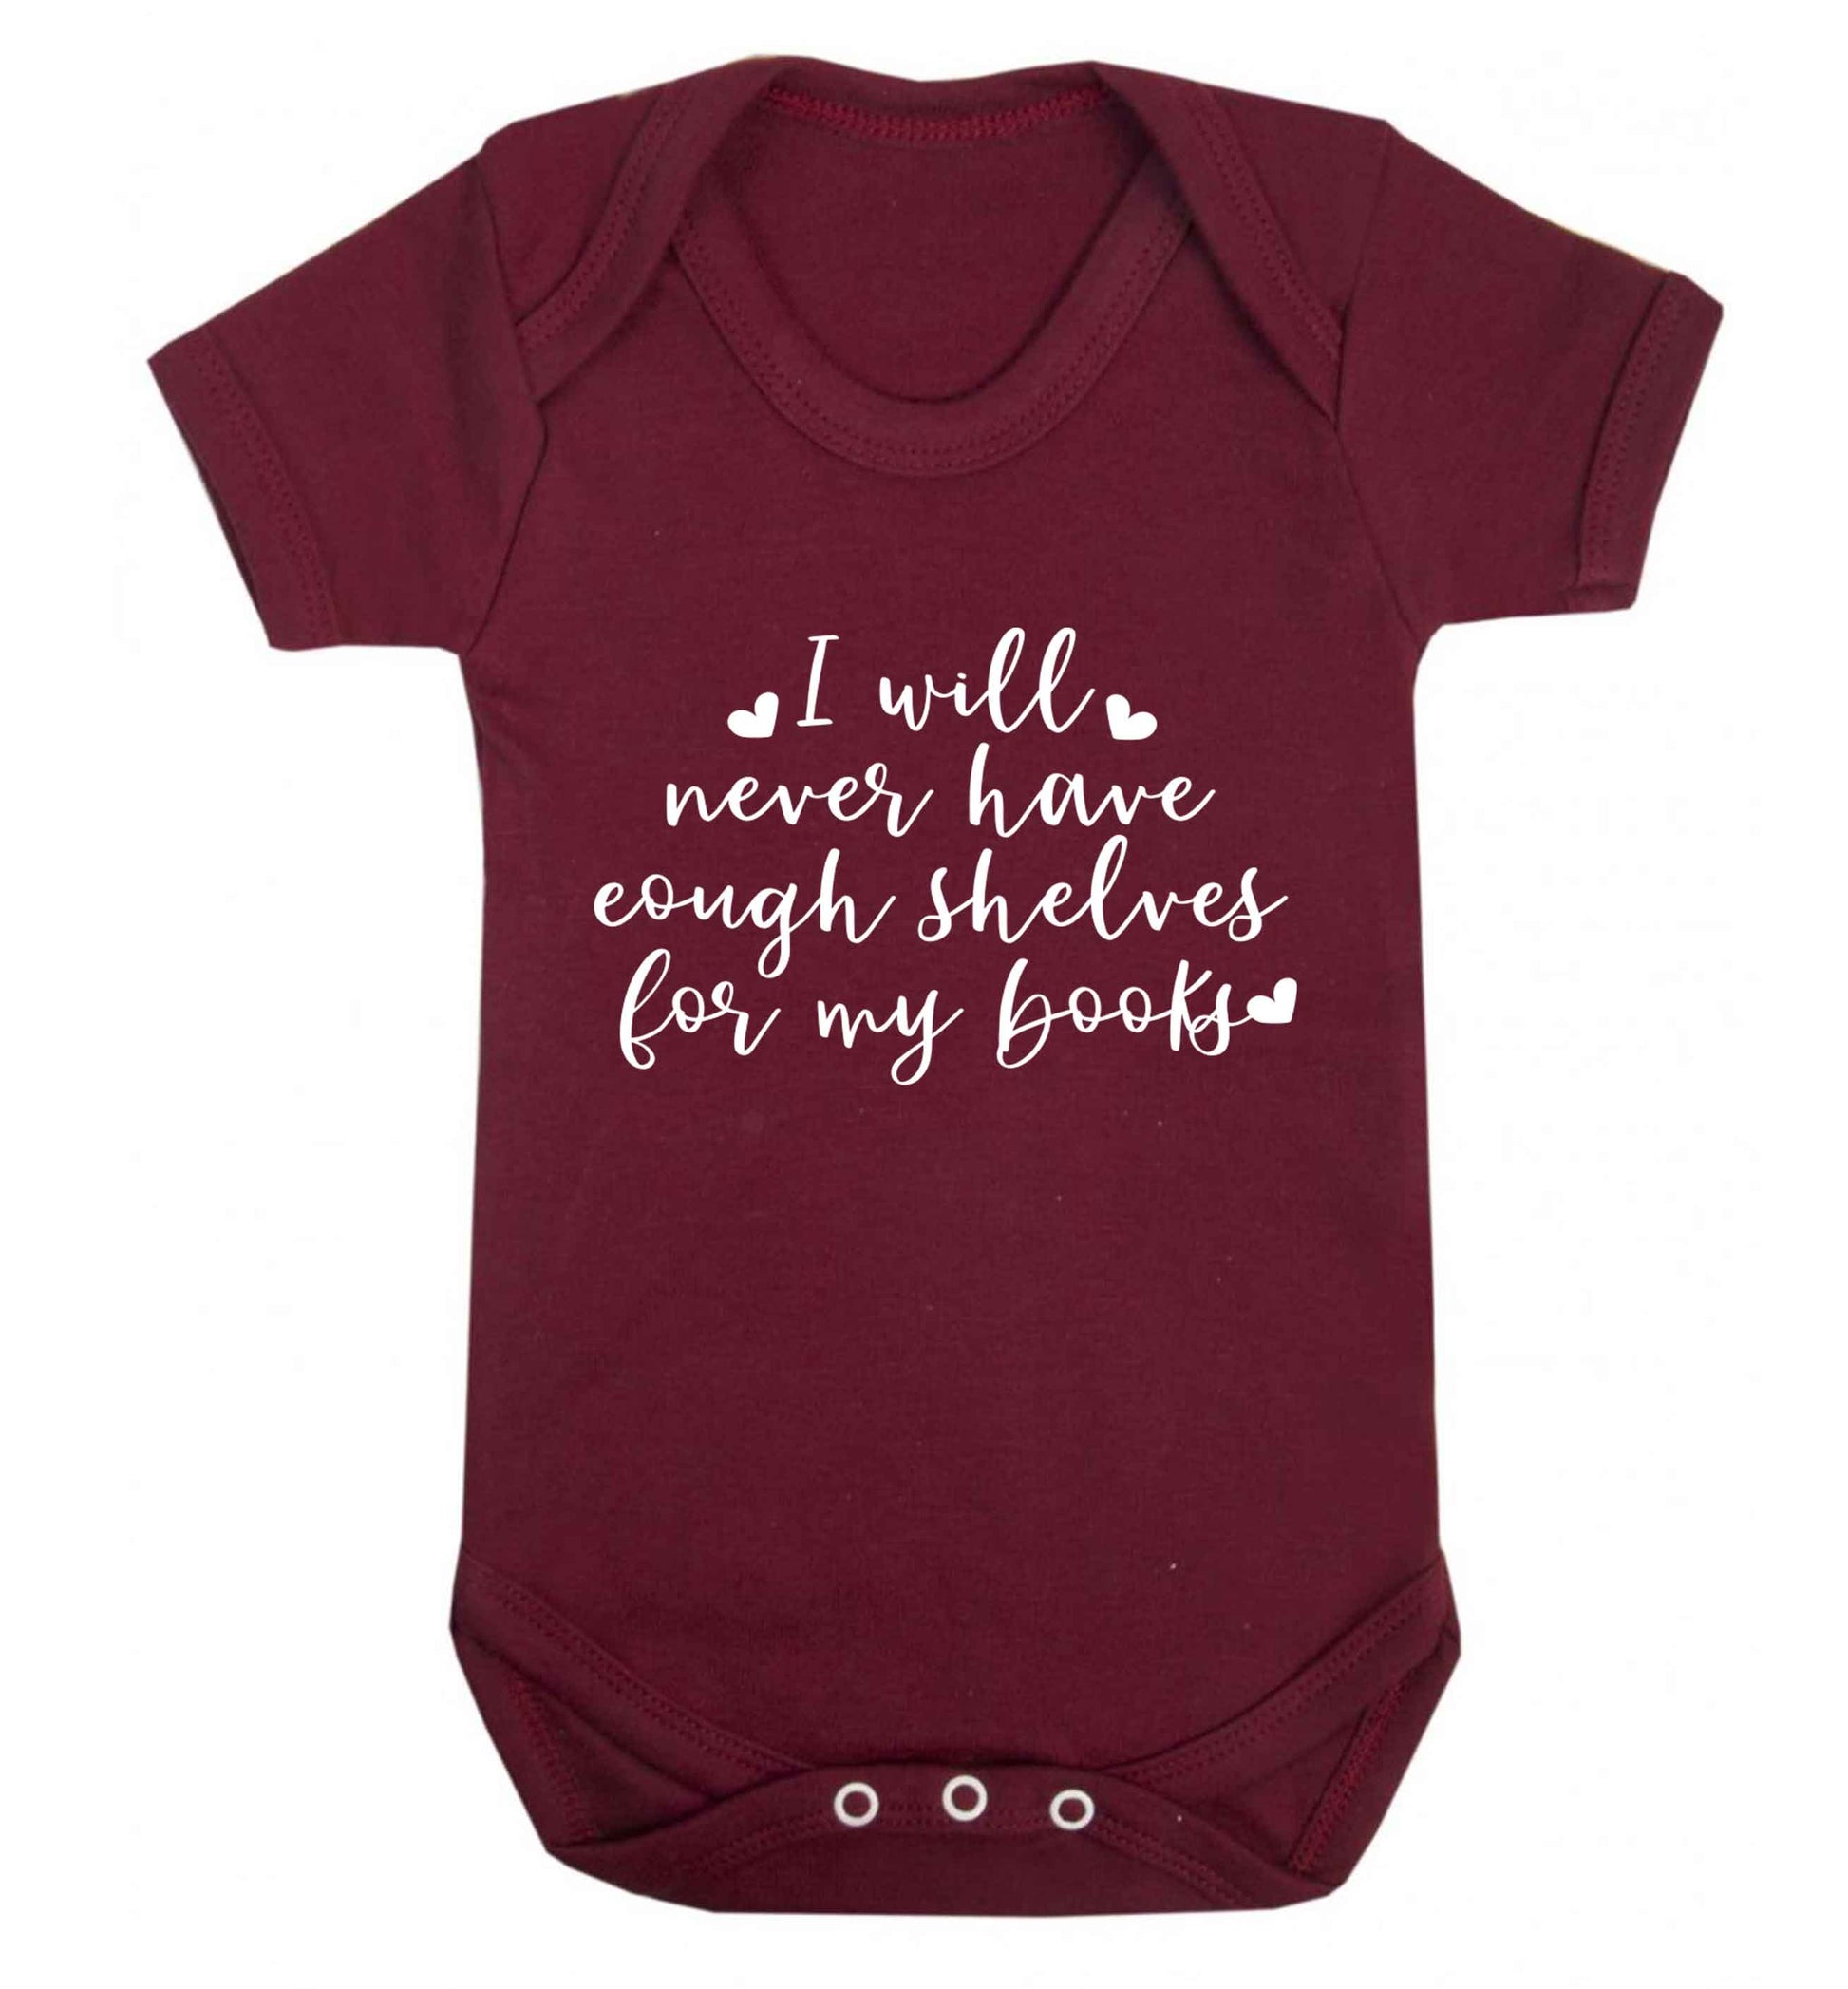 I will never have enough shelves for my books Baby Vest maroon 18-24 months